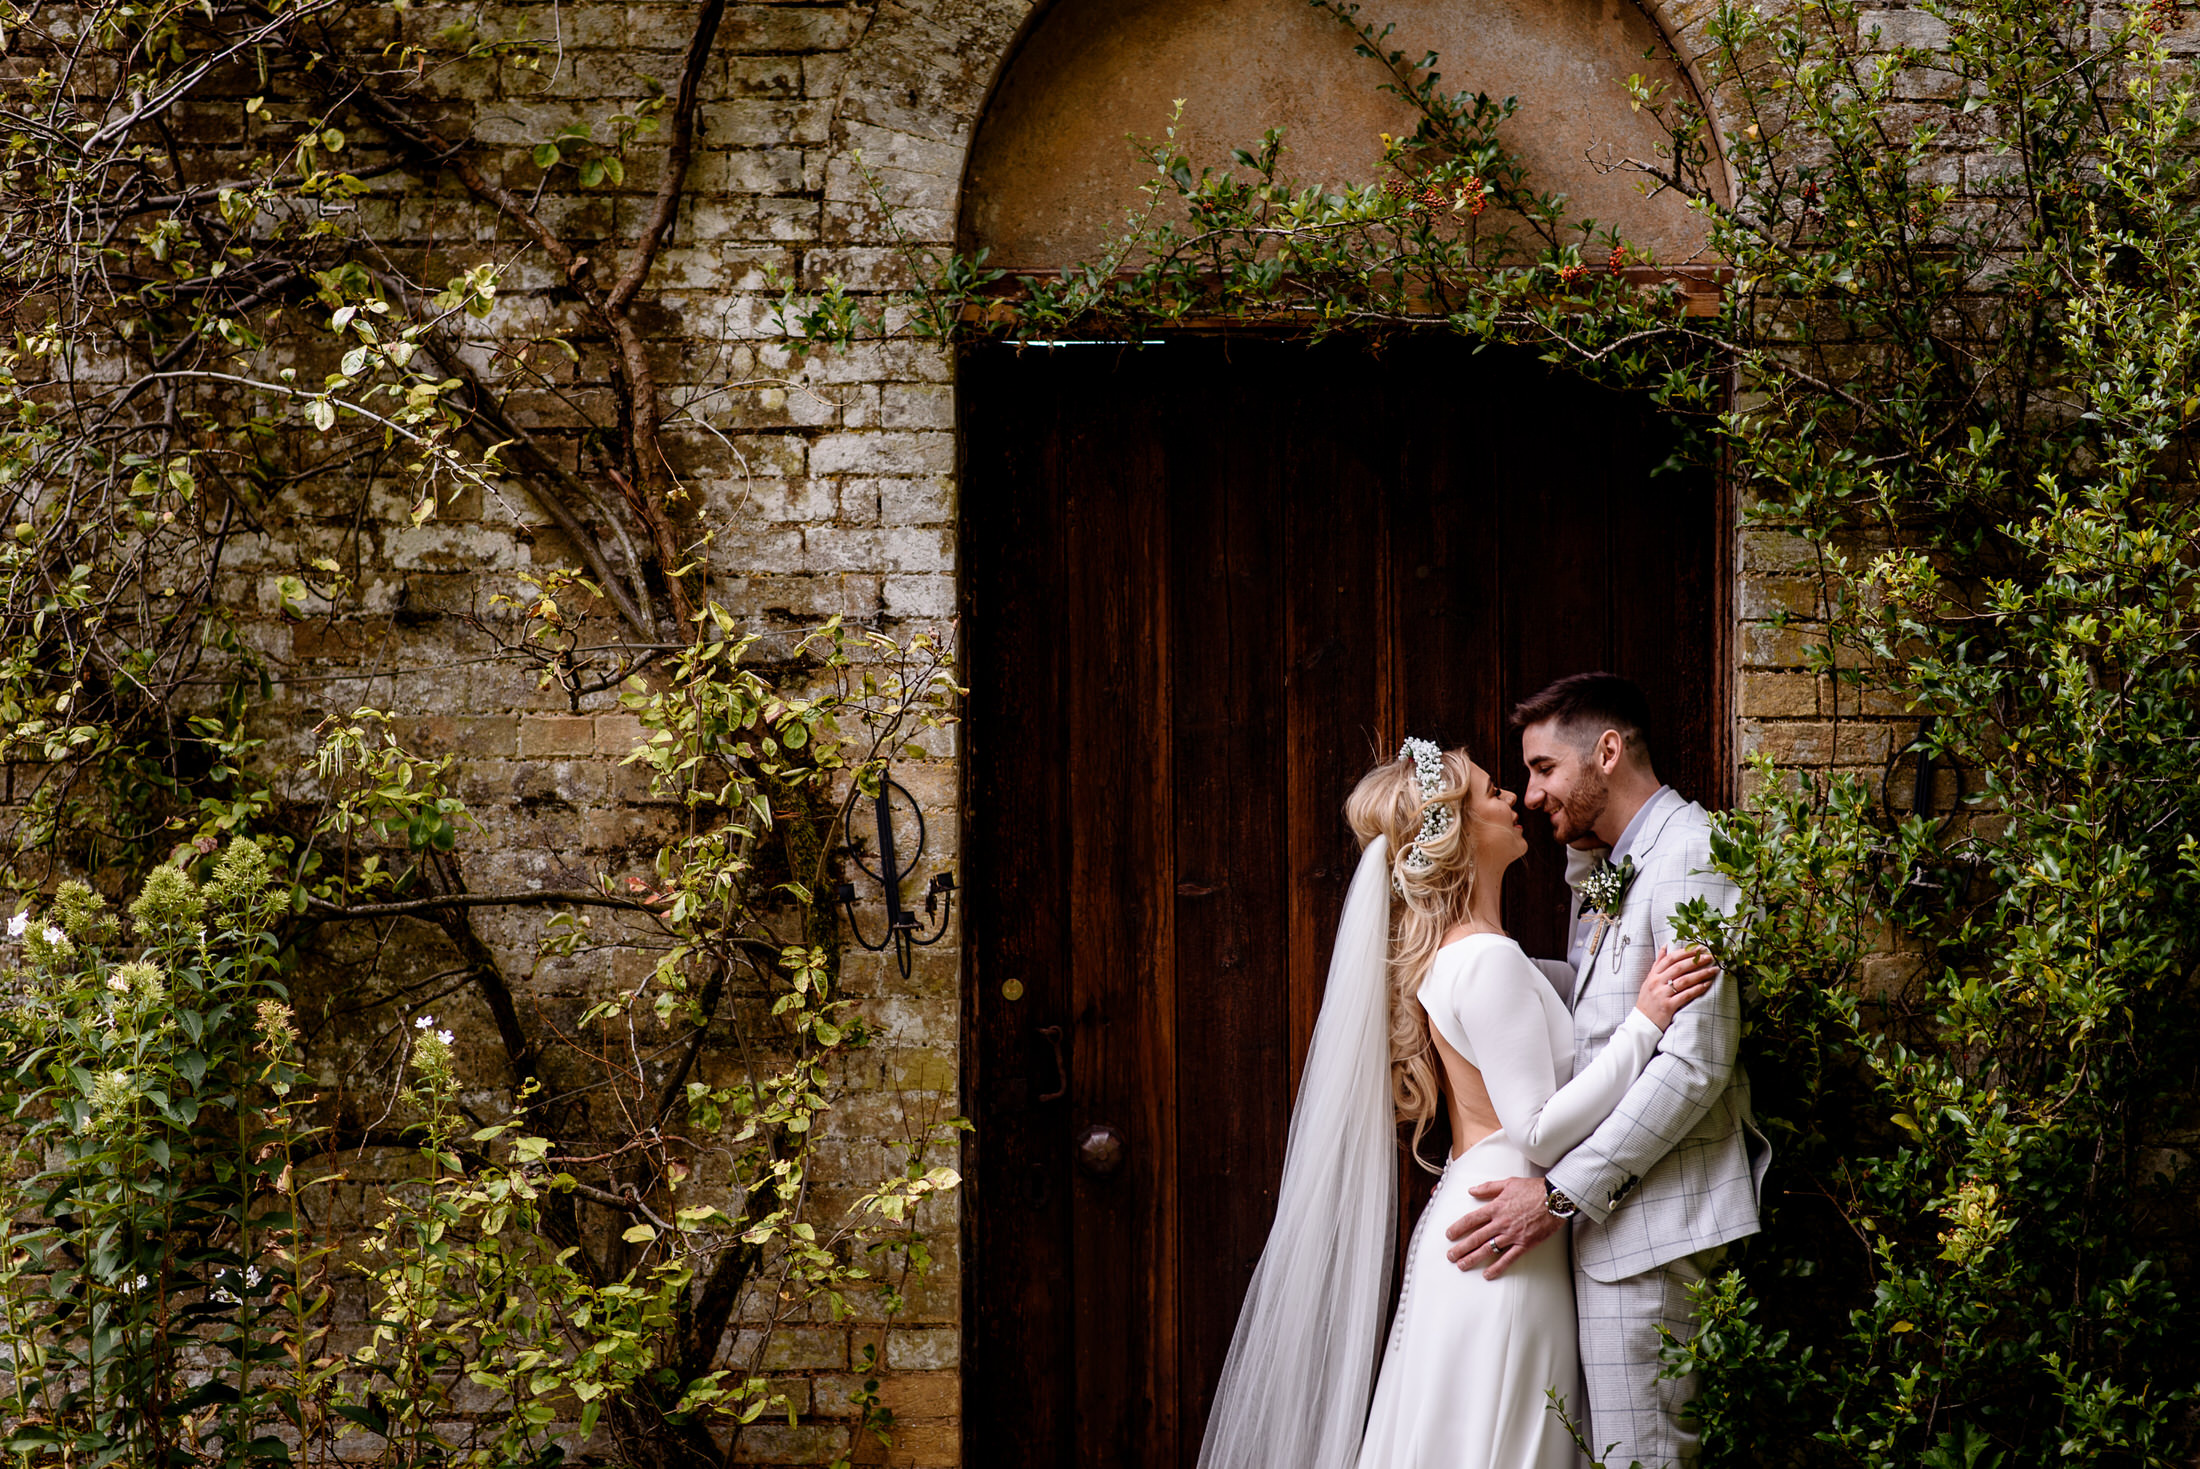 A wedding couple kisses in front of a wooden door at Scrivelsby Walled Garden.